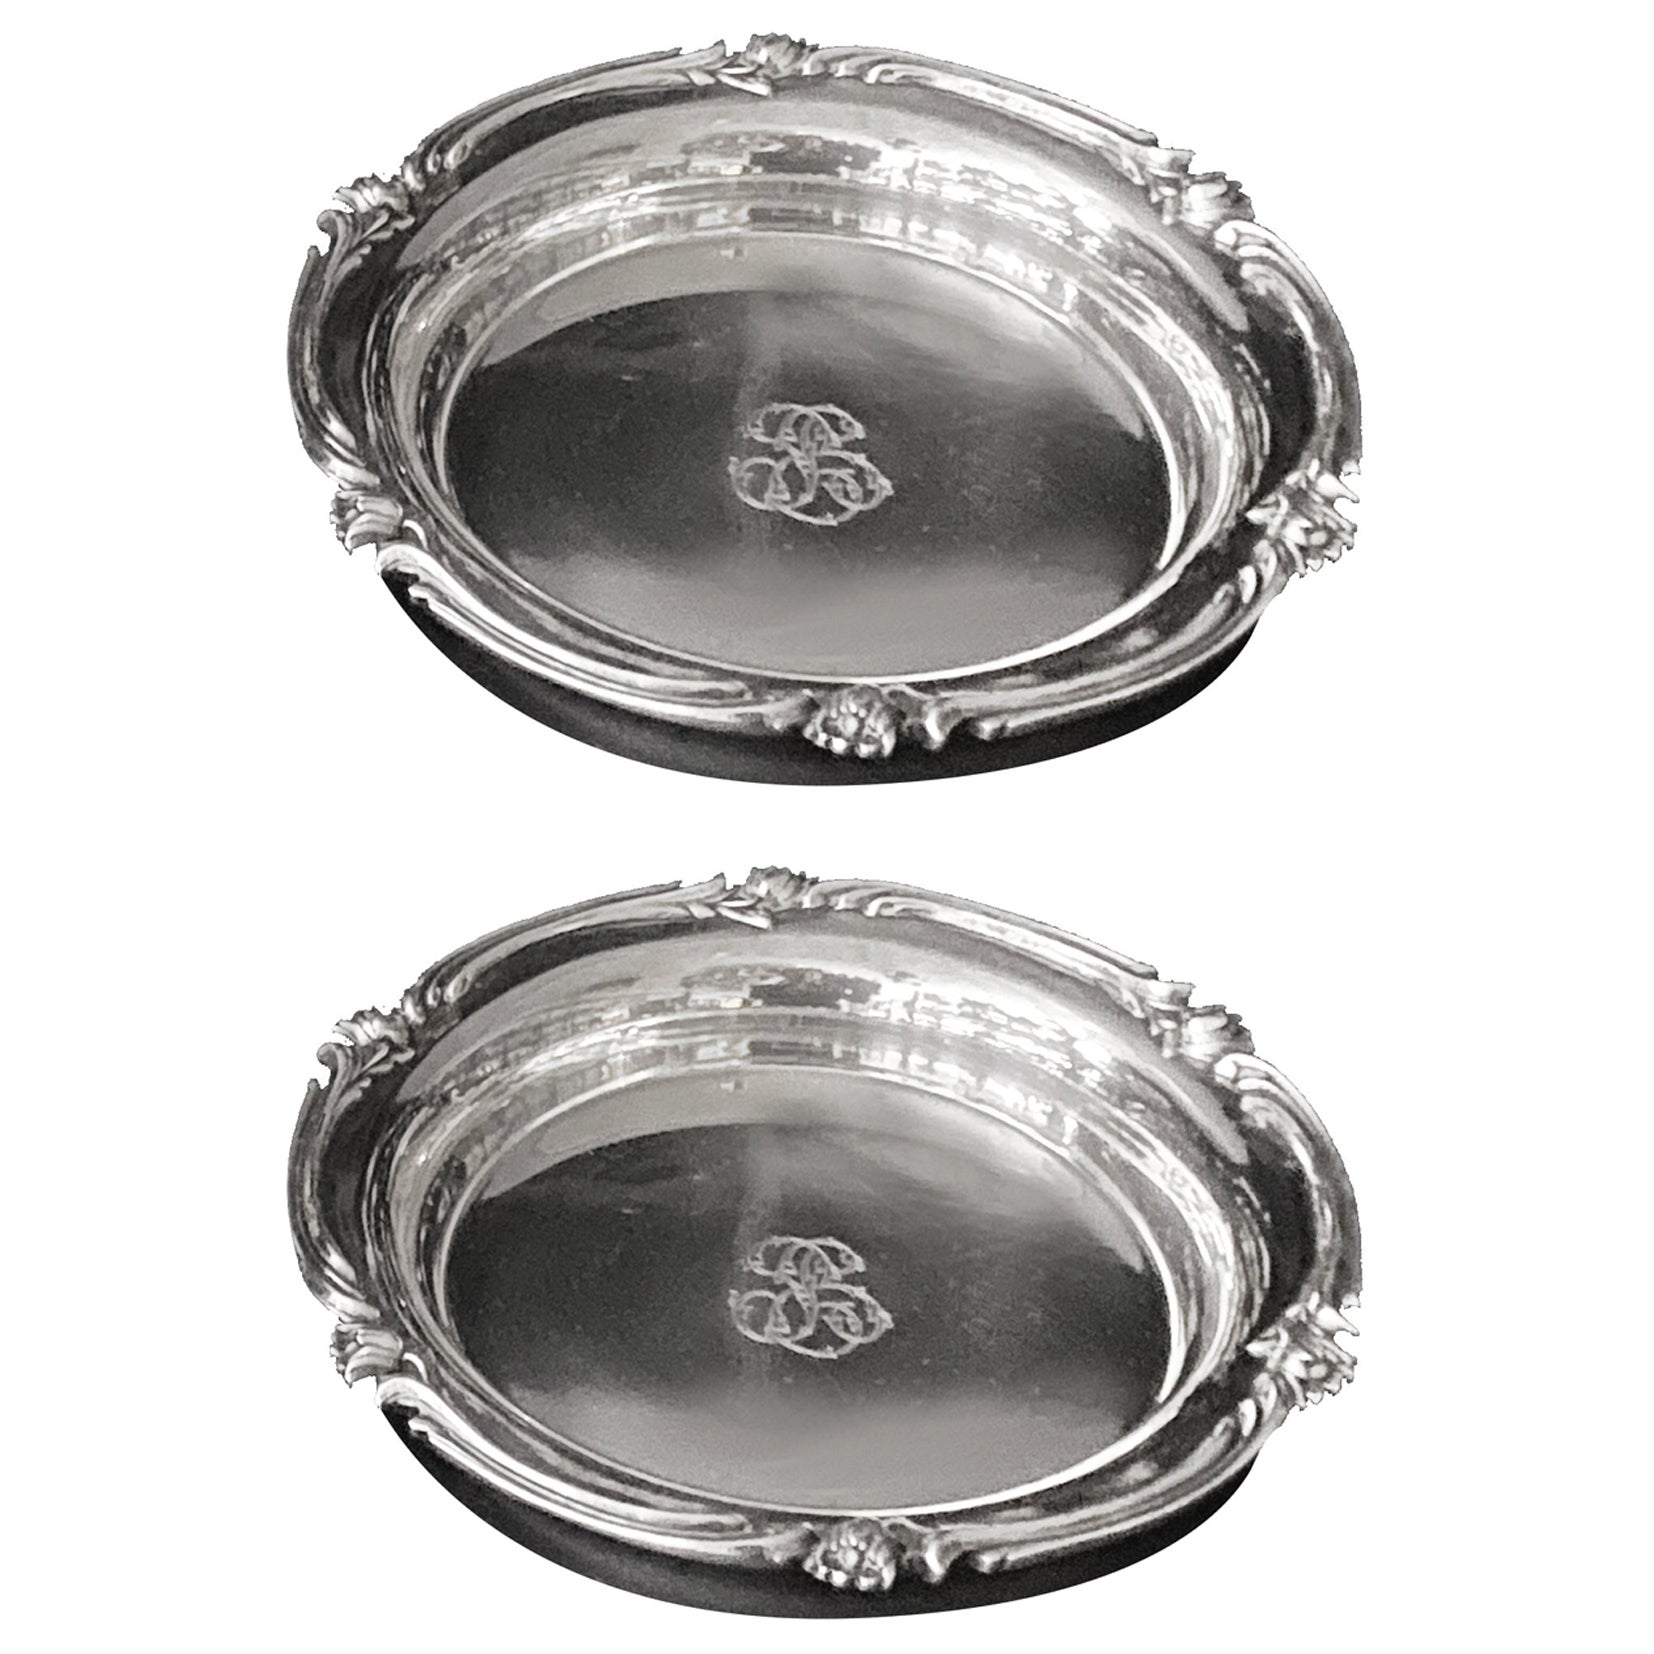 Set of 2 Old Christofle Coaster Silver Plated, circa 1880